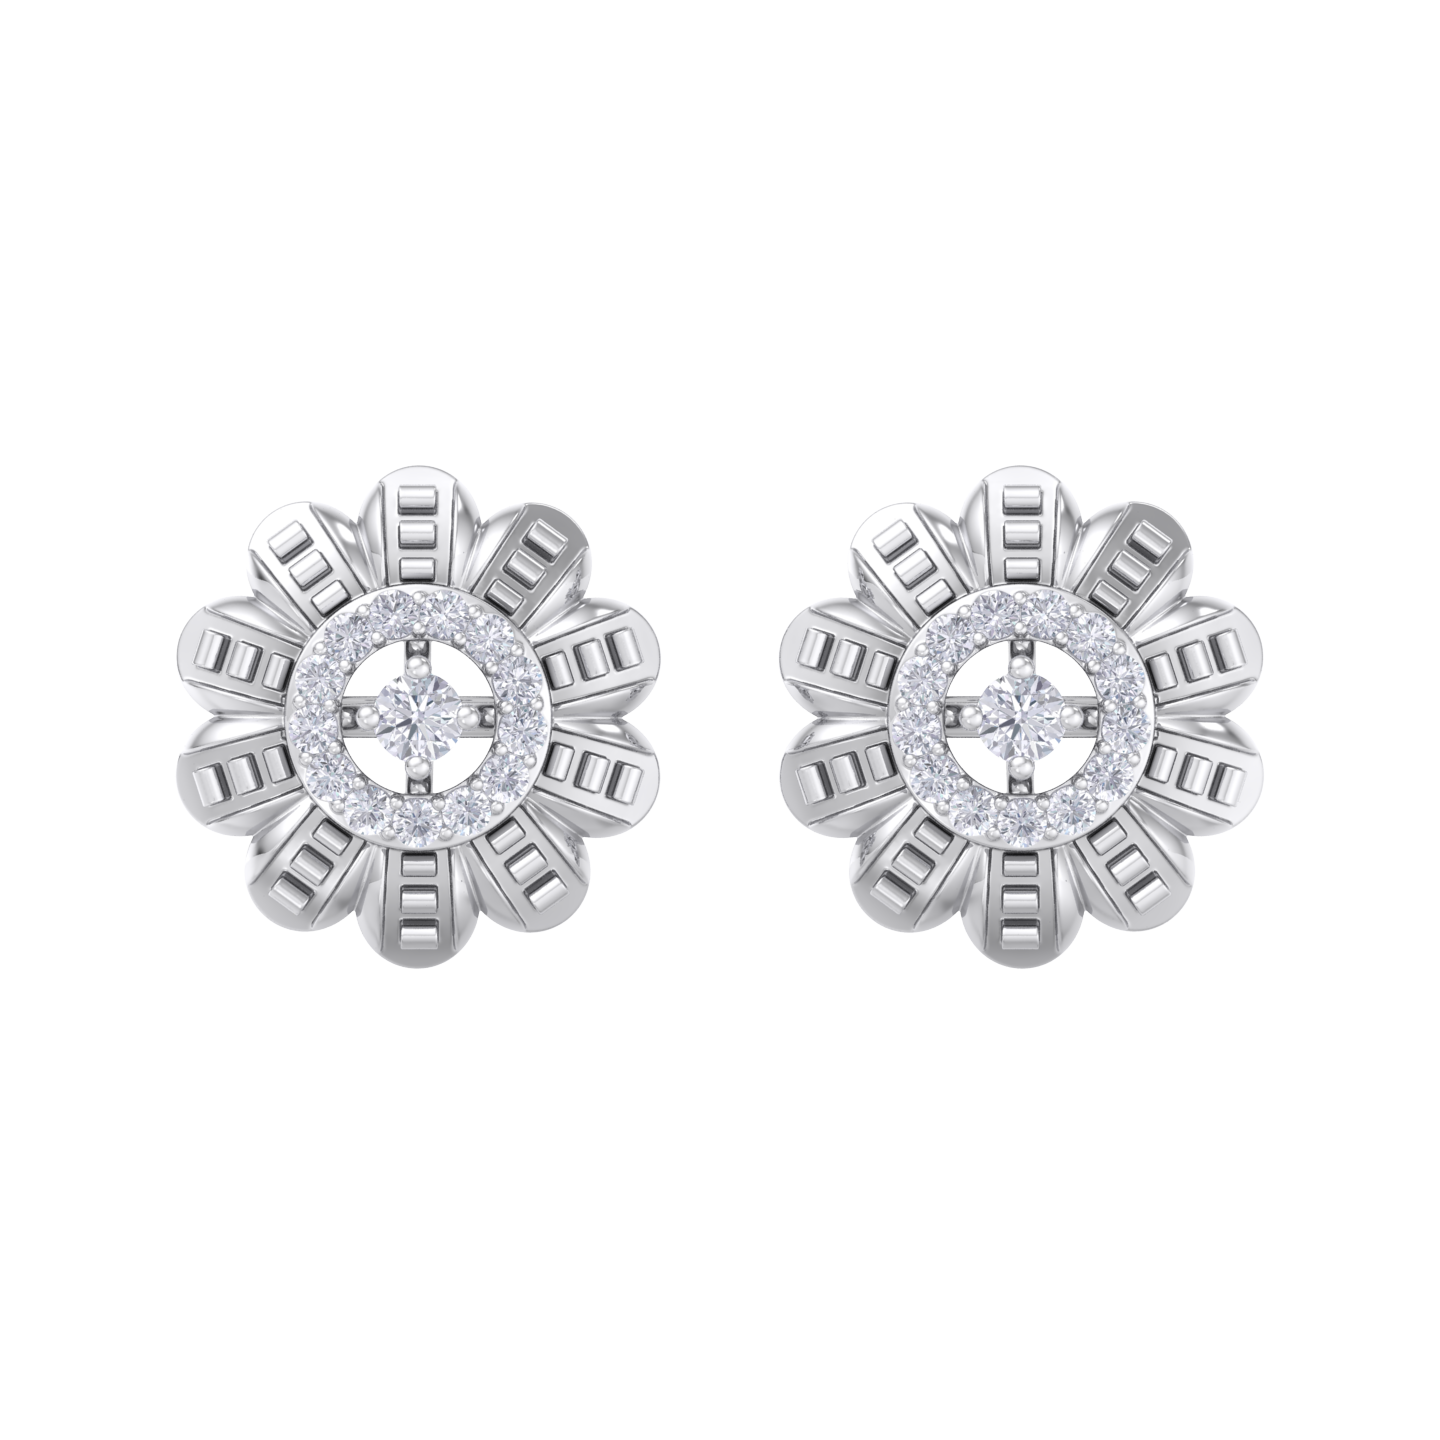 Stud earrings in white gold with white diamonds of 0.29 ct in weight